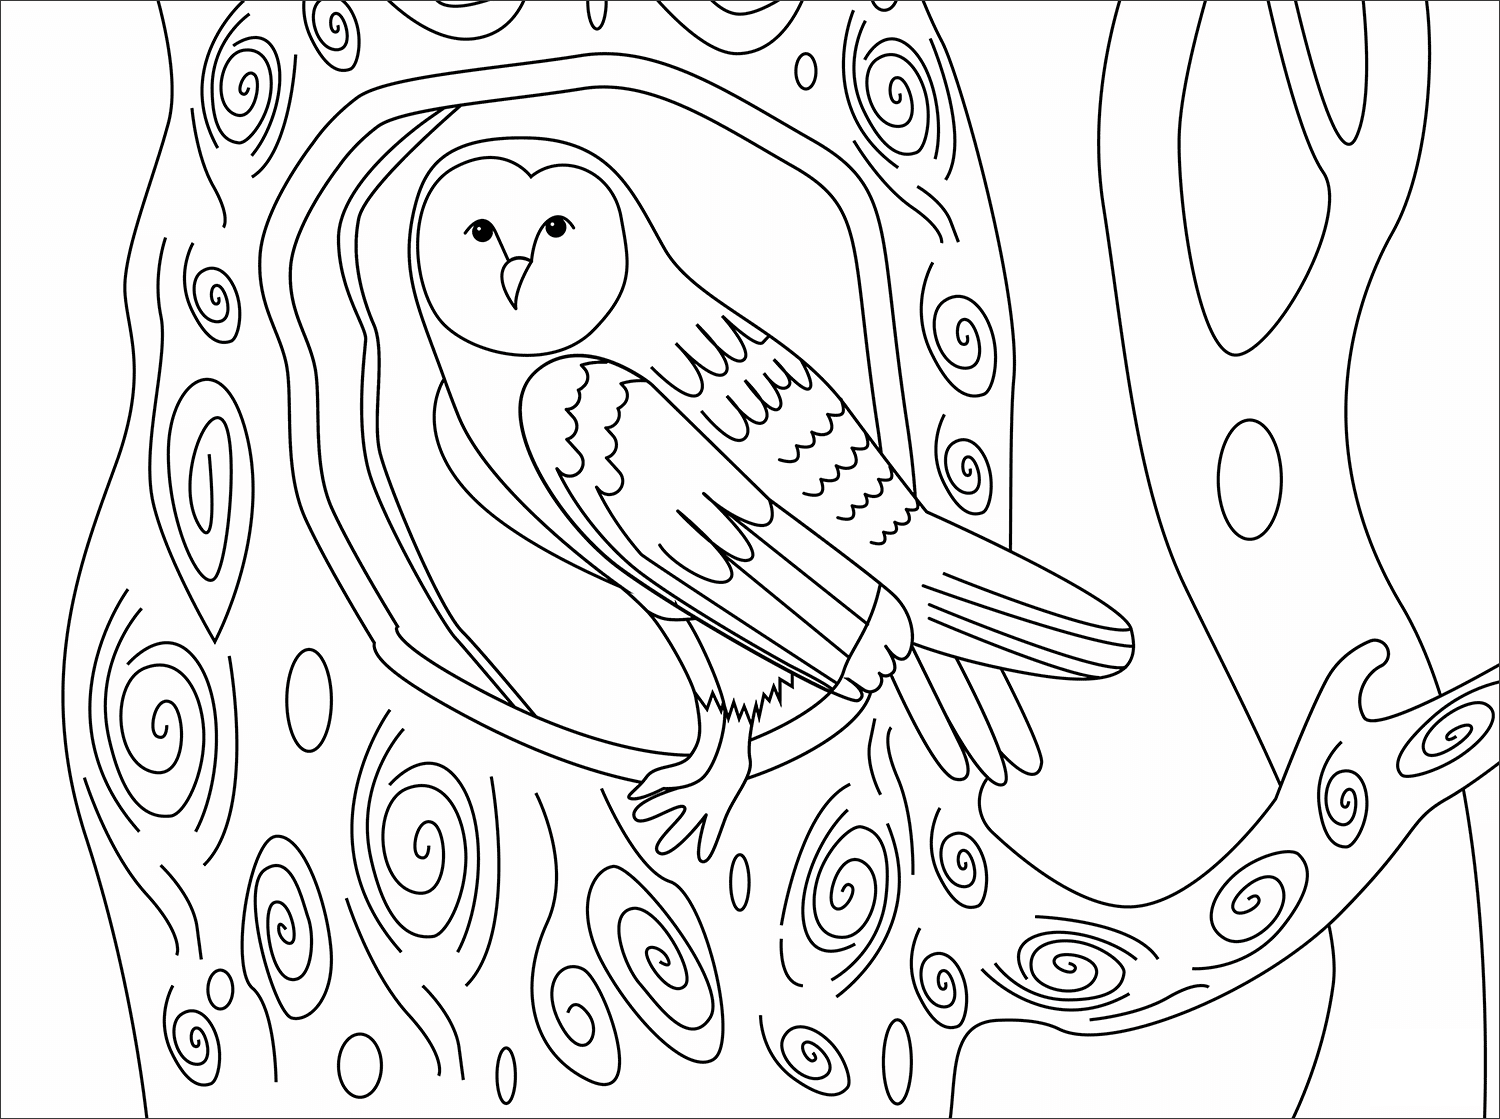 Barn Owl Animal Simple Coloring Page